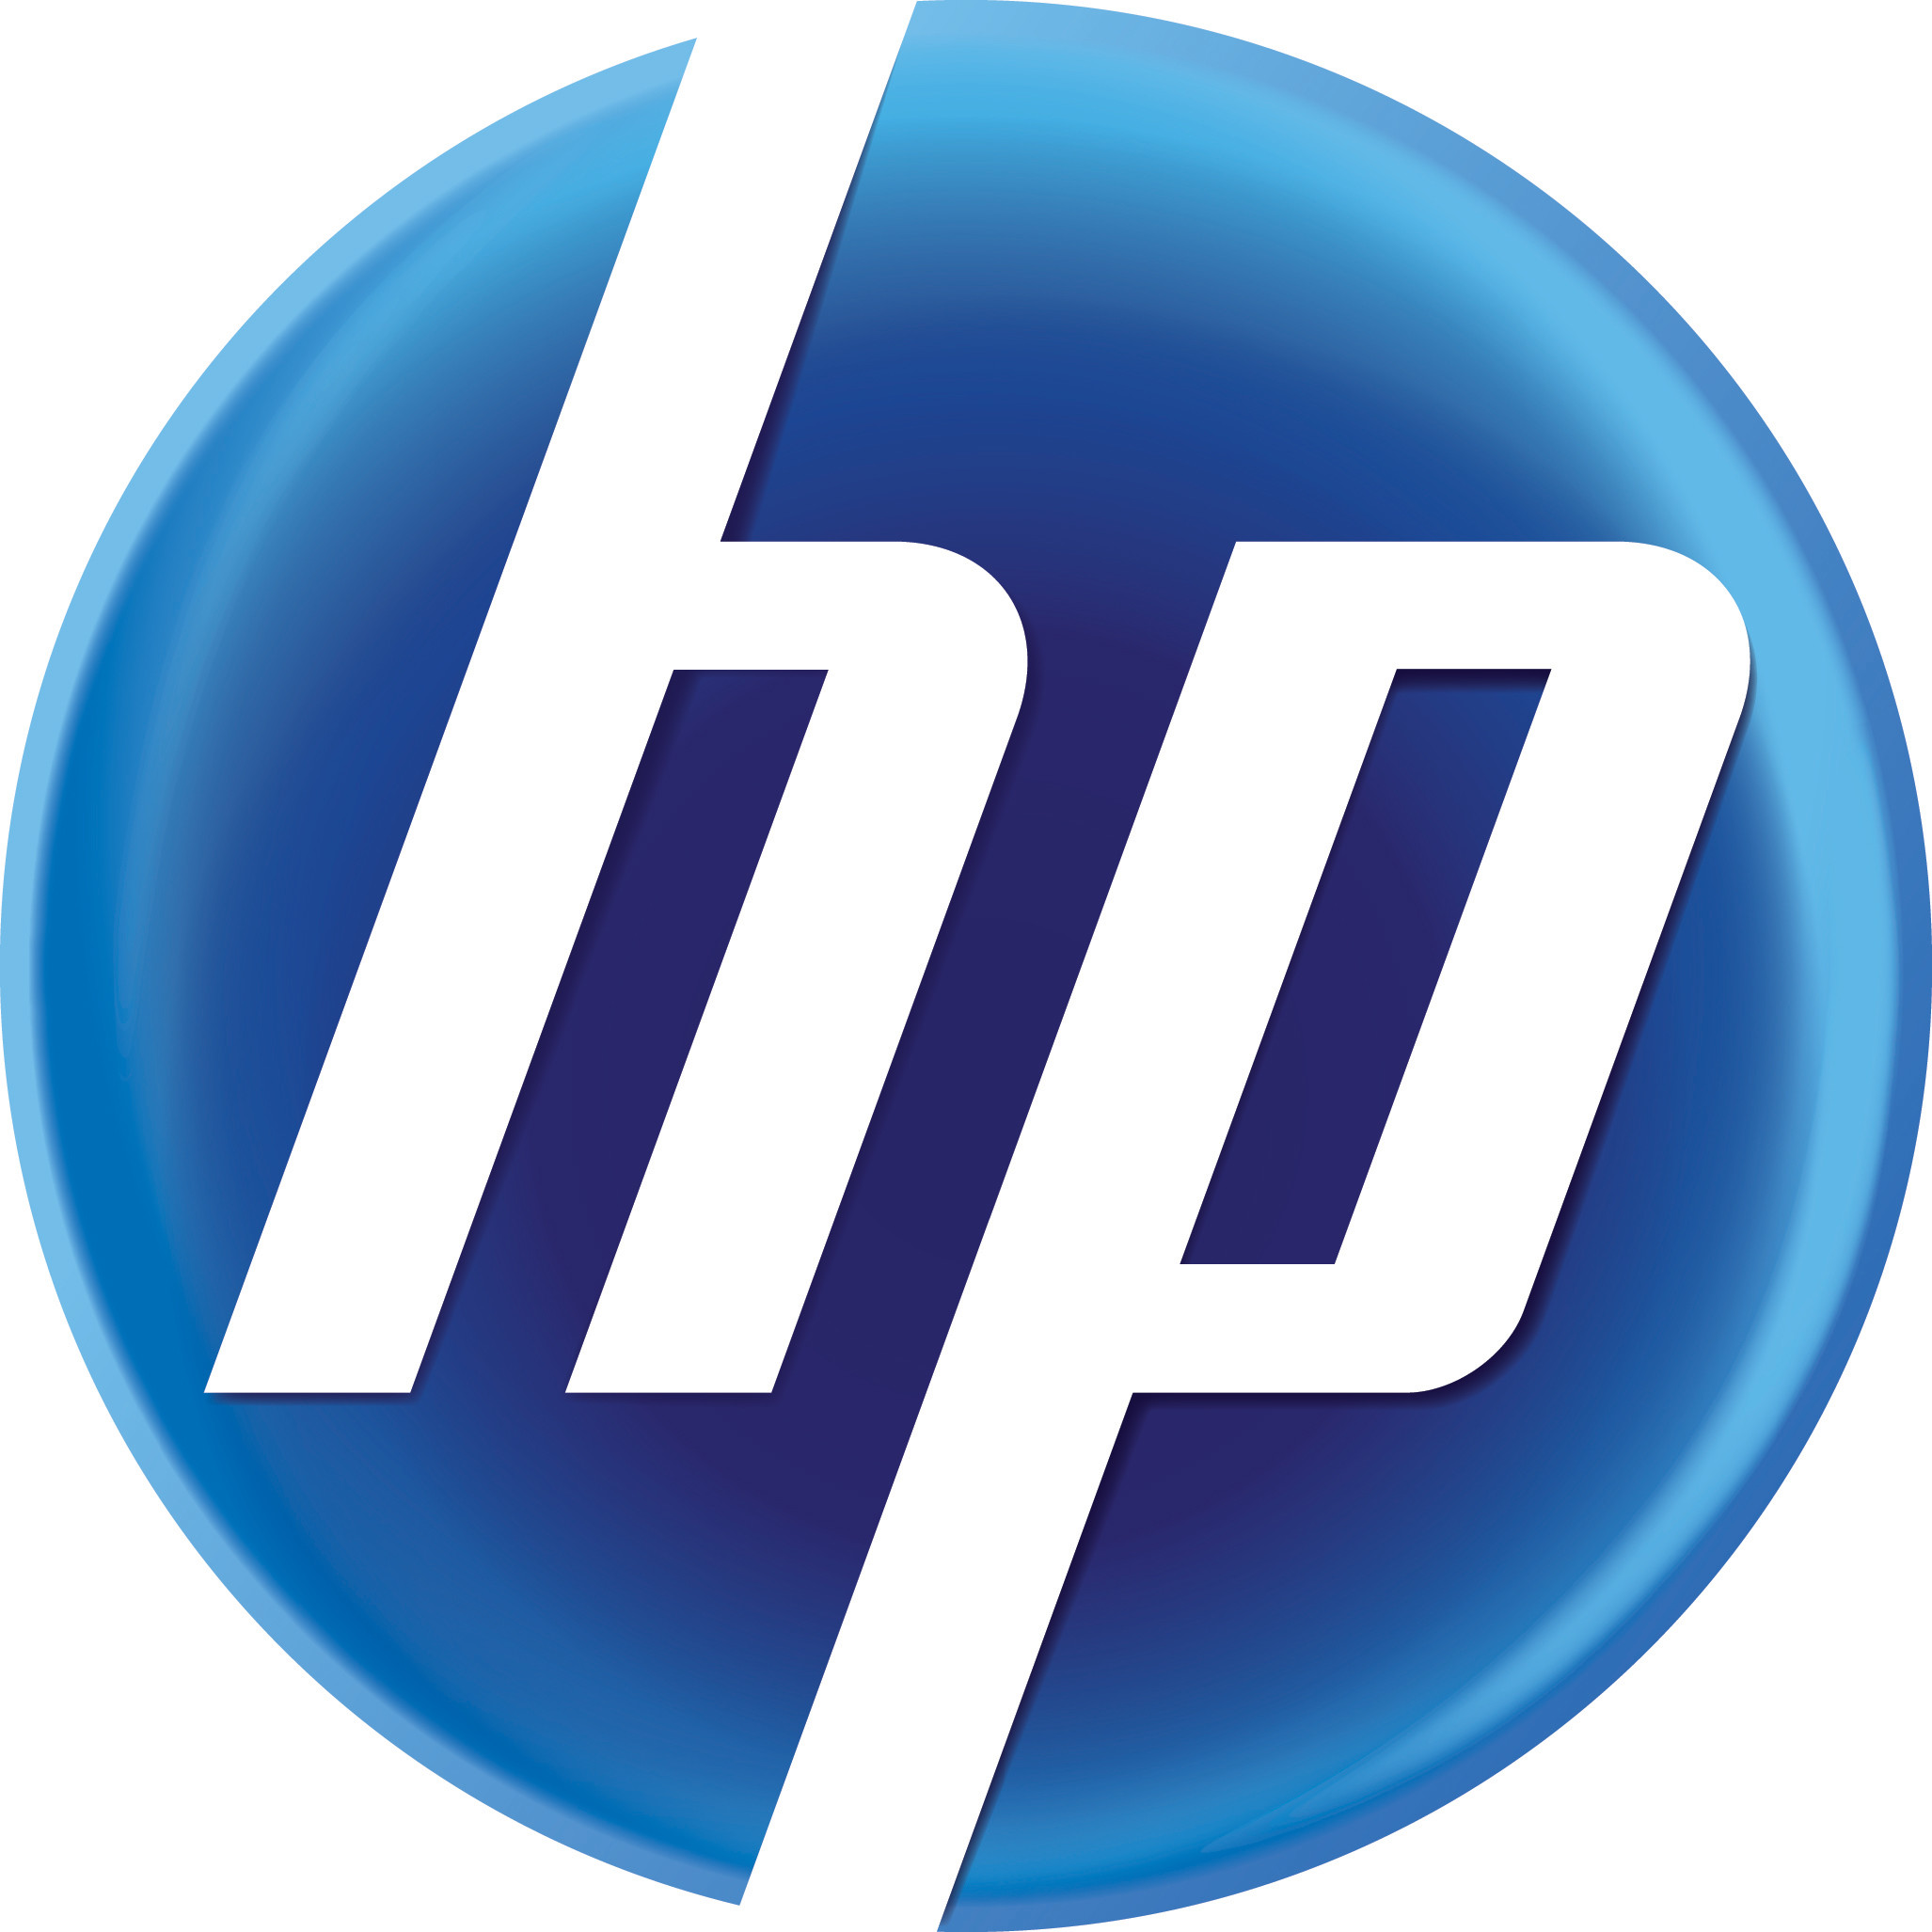 2054x2054 coordinated solutions with partners we know and trust. Together we develop  the best IT solutions Â· Hewlett-Packard ...